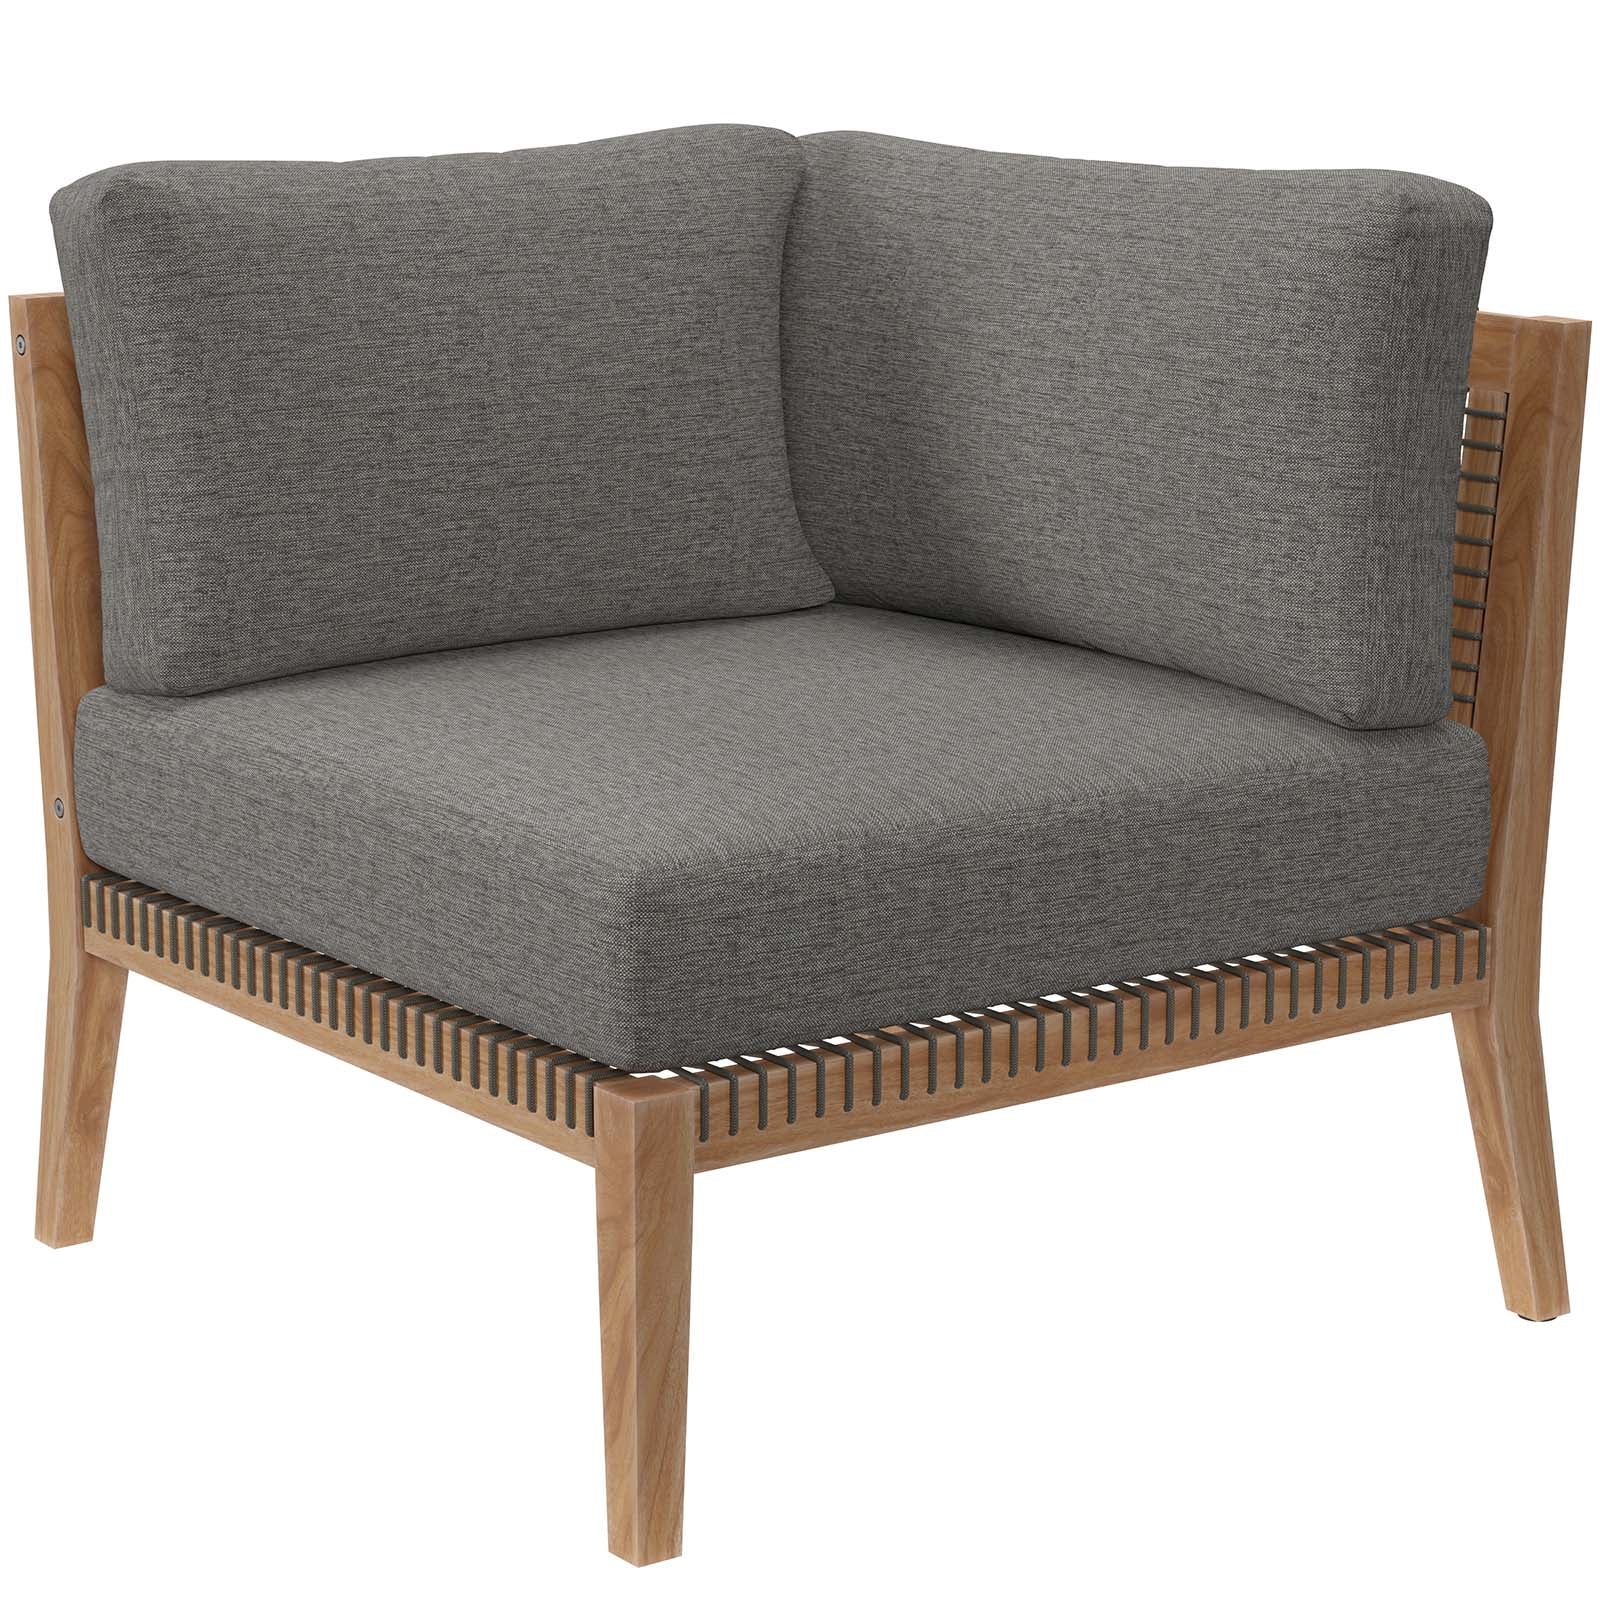 Modway Outdoor Sofas - Clearwater-Outdoor-Patio-Teak-Wood-Corner-Chair-Gray-Graphite